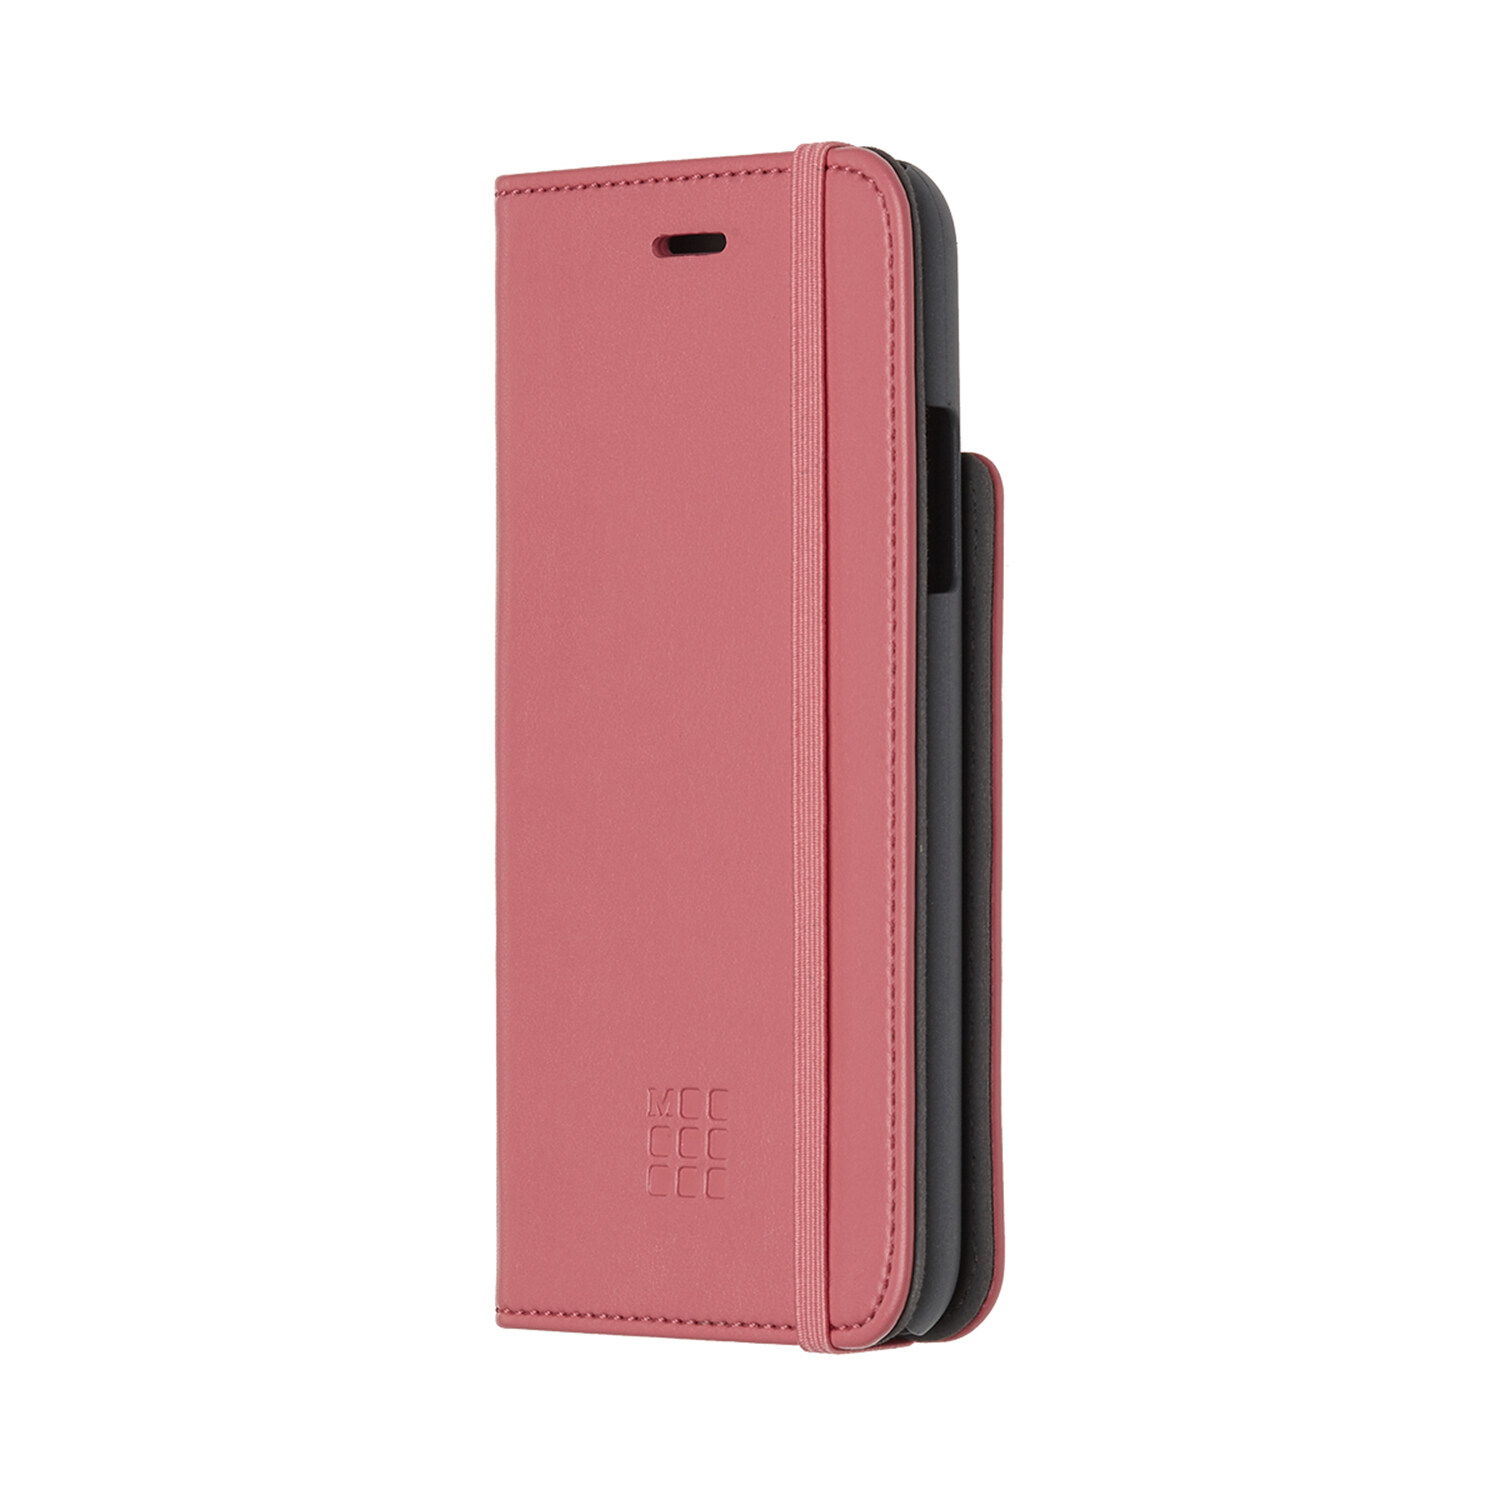 Moleskine Case Booktype, iPhone X, Daisy Pink (Other)